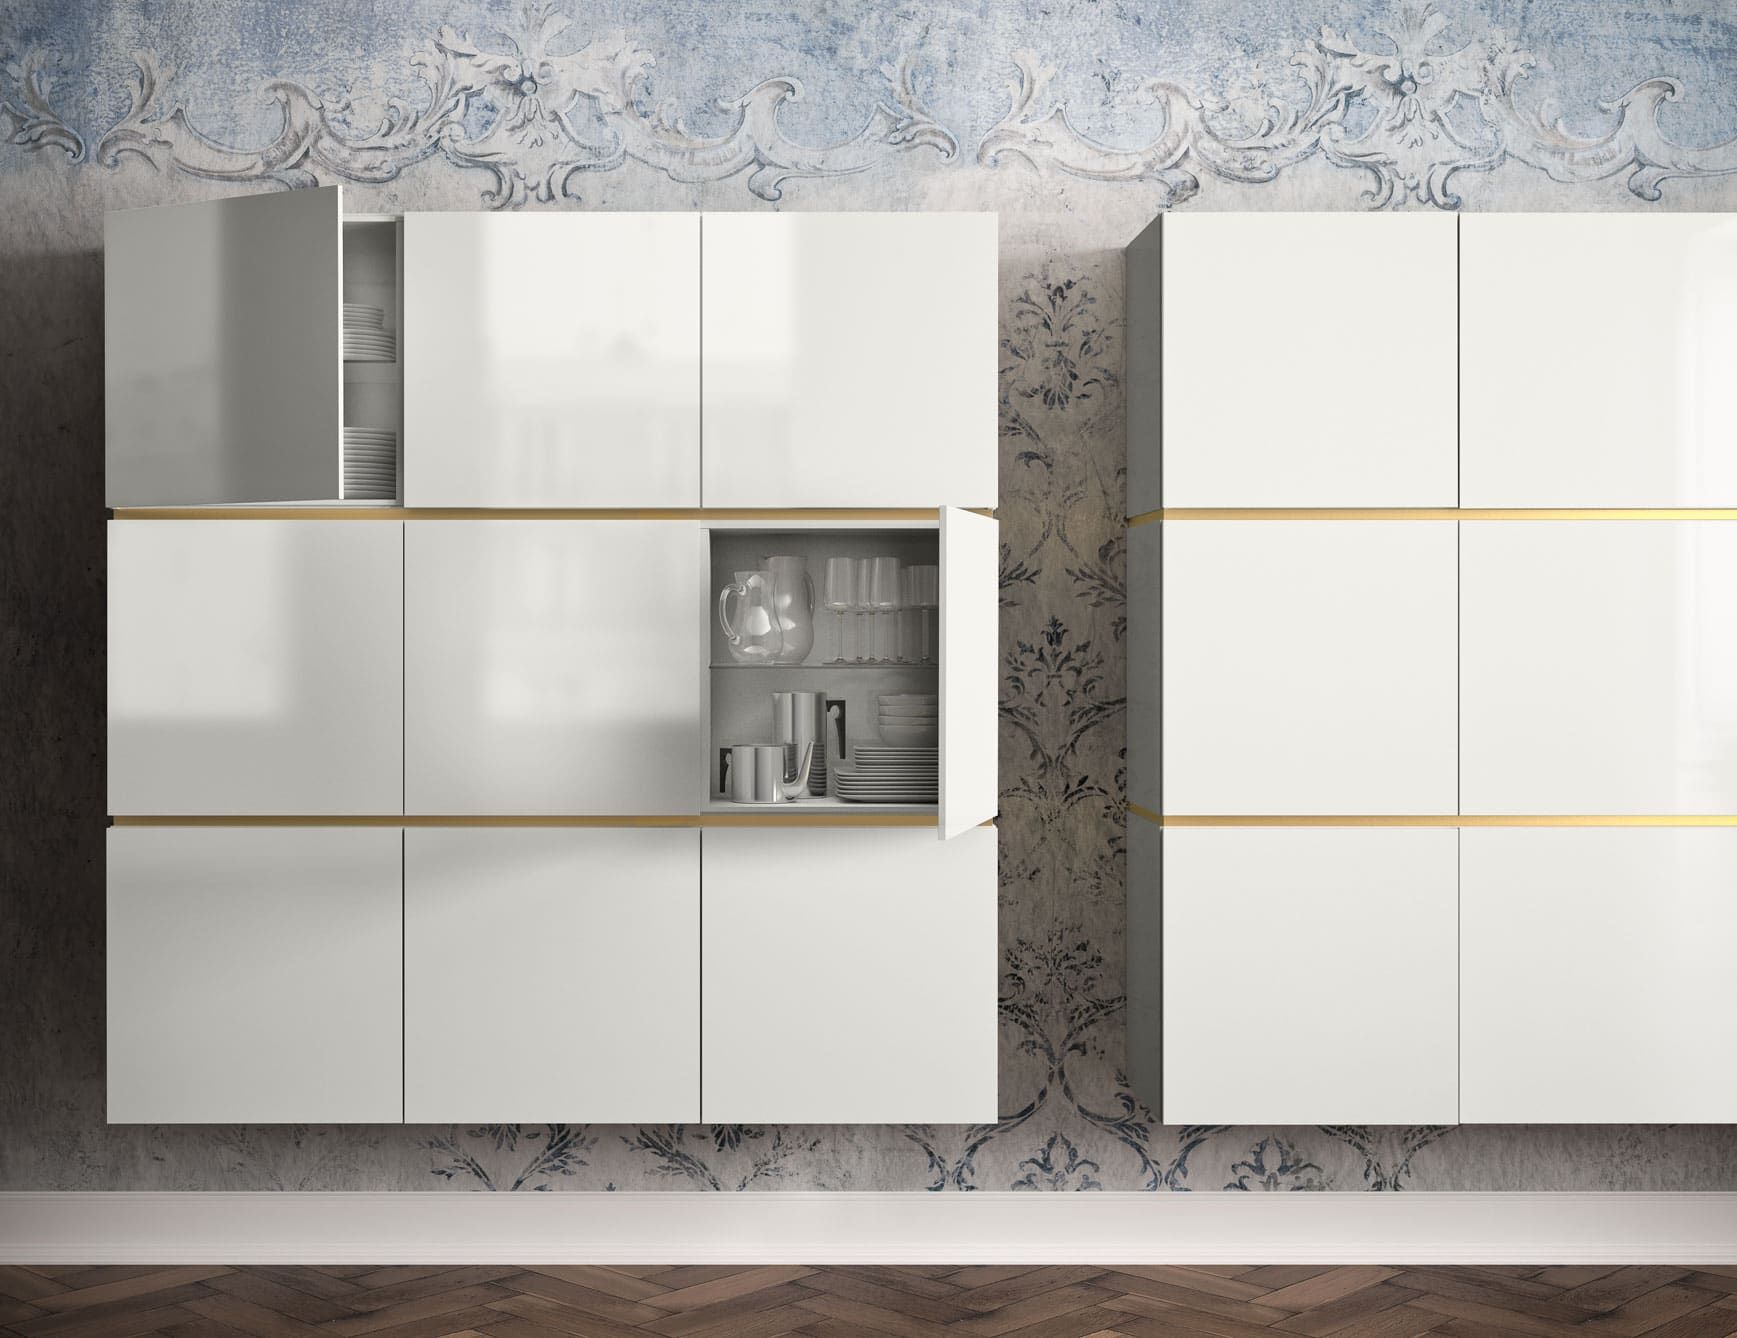 People contemporary Italian wall unit with white gloss lacquered wood